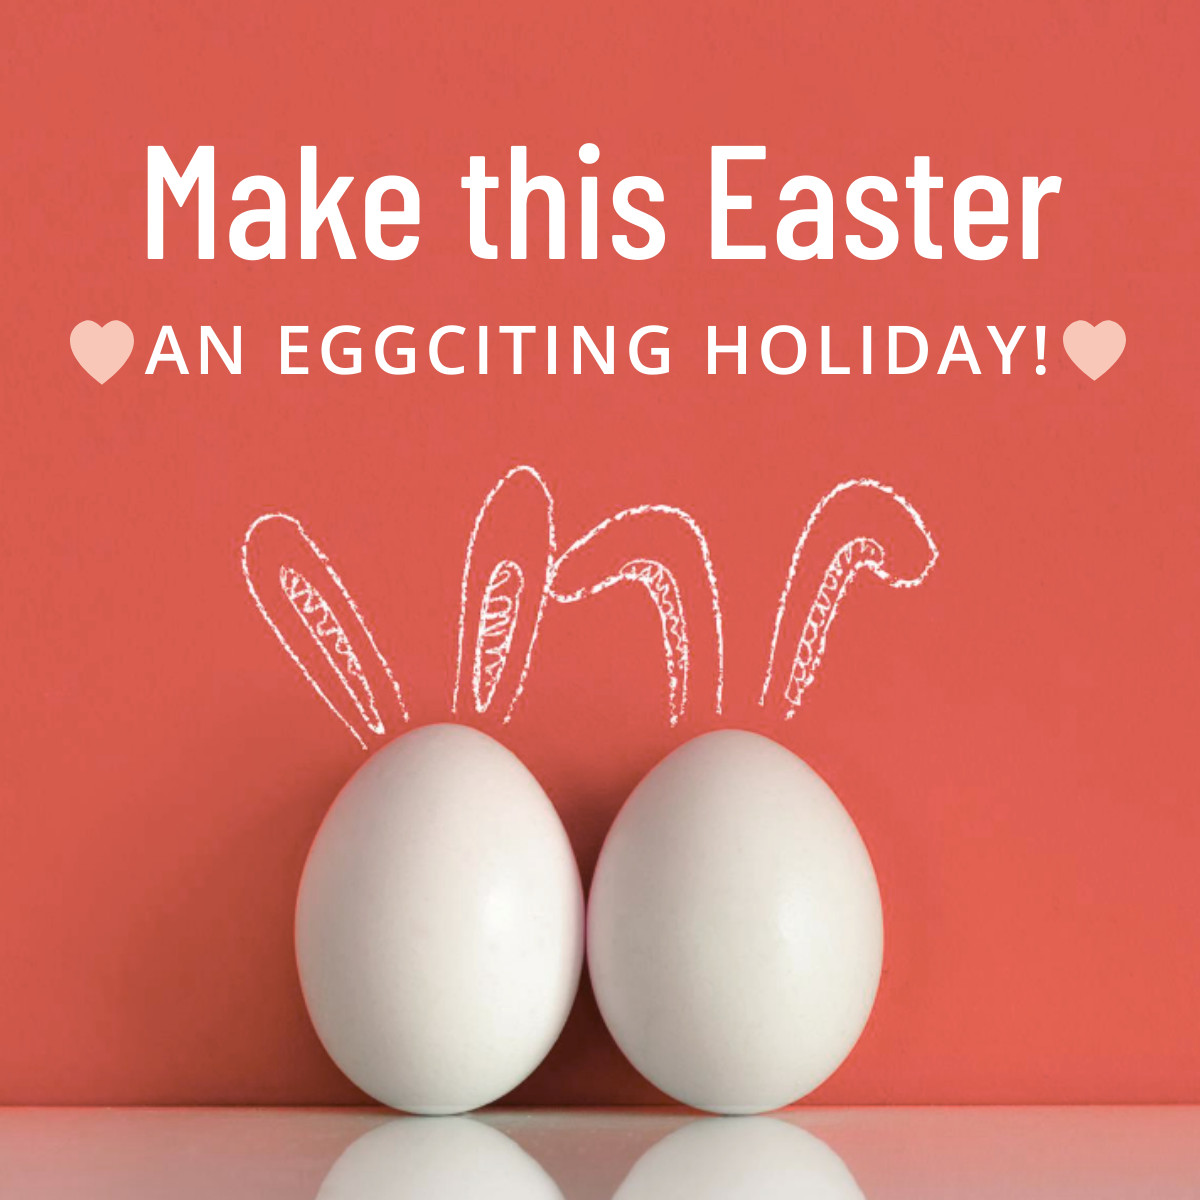 Make Easter an Eggciting Holiday Inline Rectangle 300x250